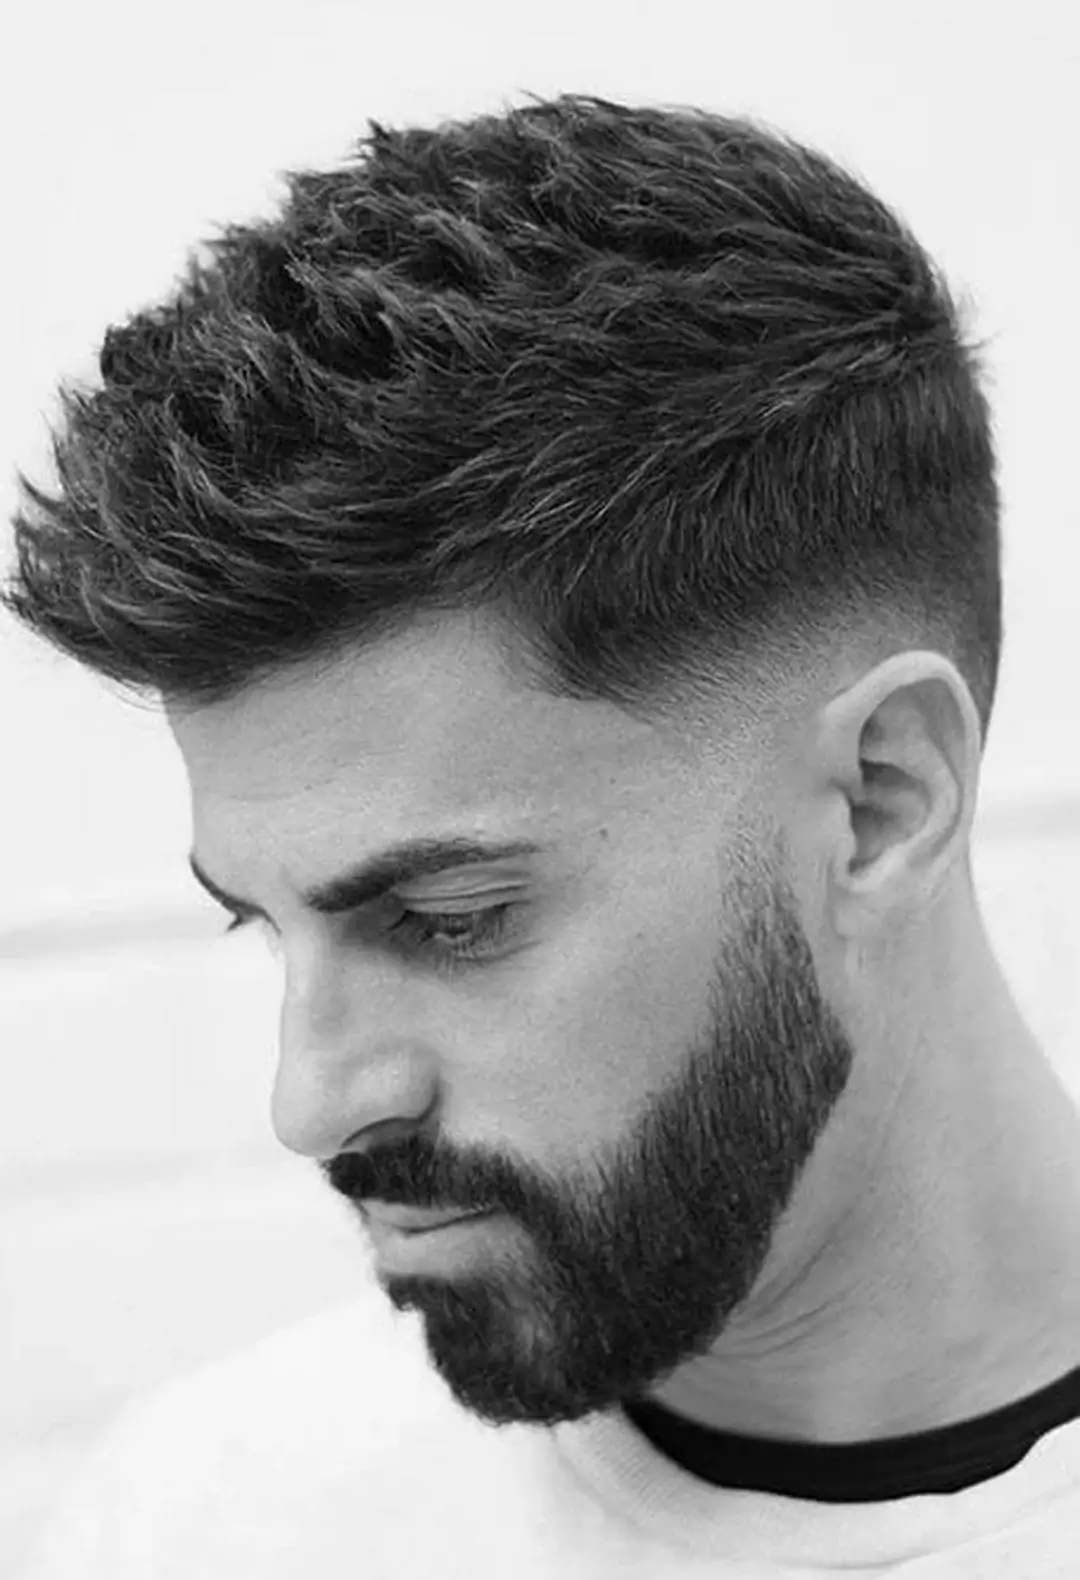 Men's Crew Cut with Low Fade from Fifth Ave Barber Shop in Midtown NYC